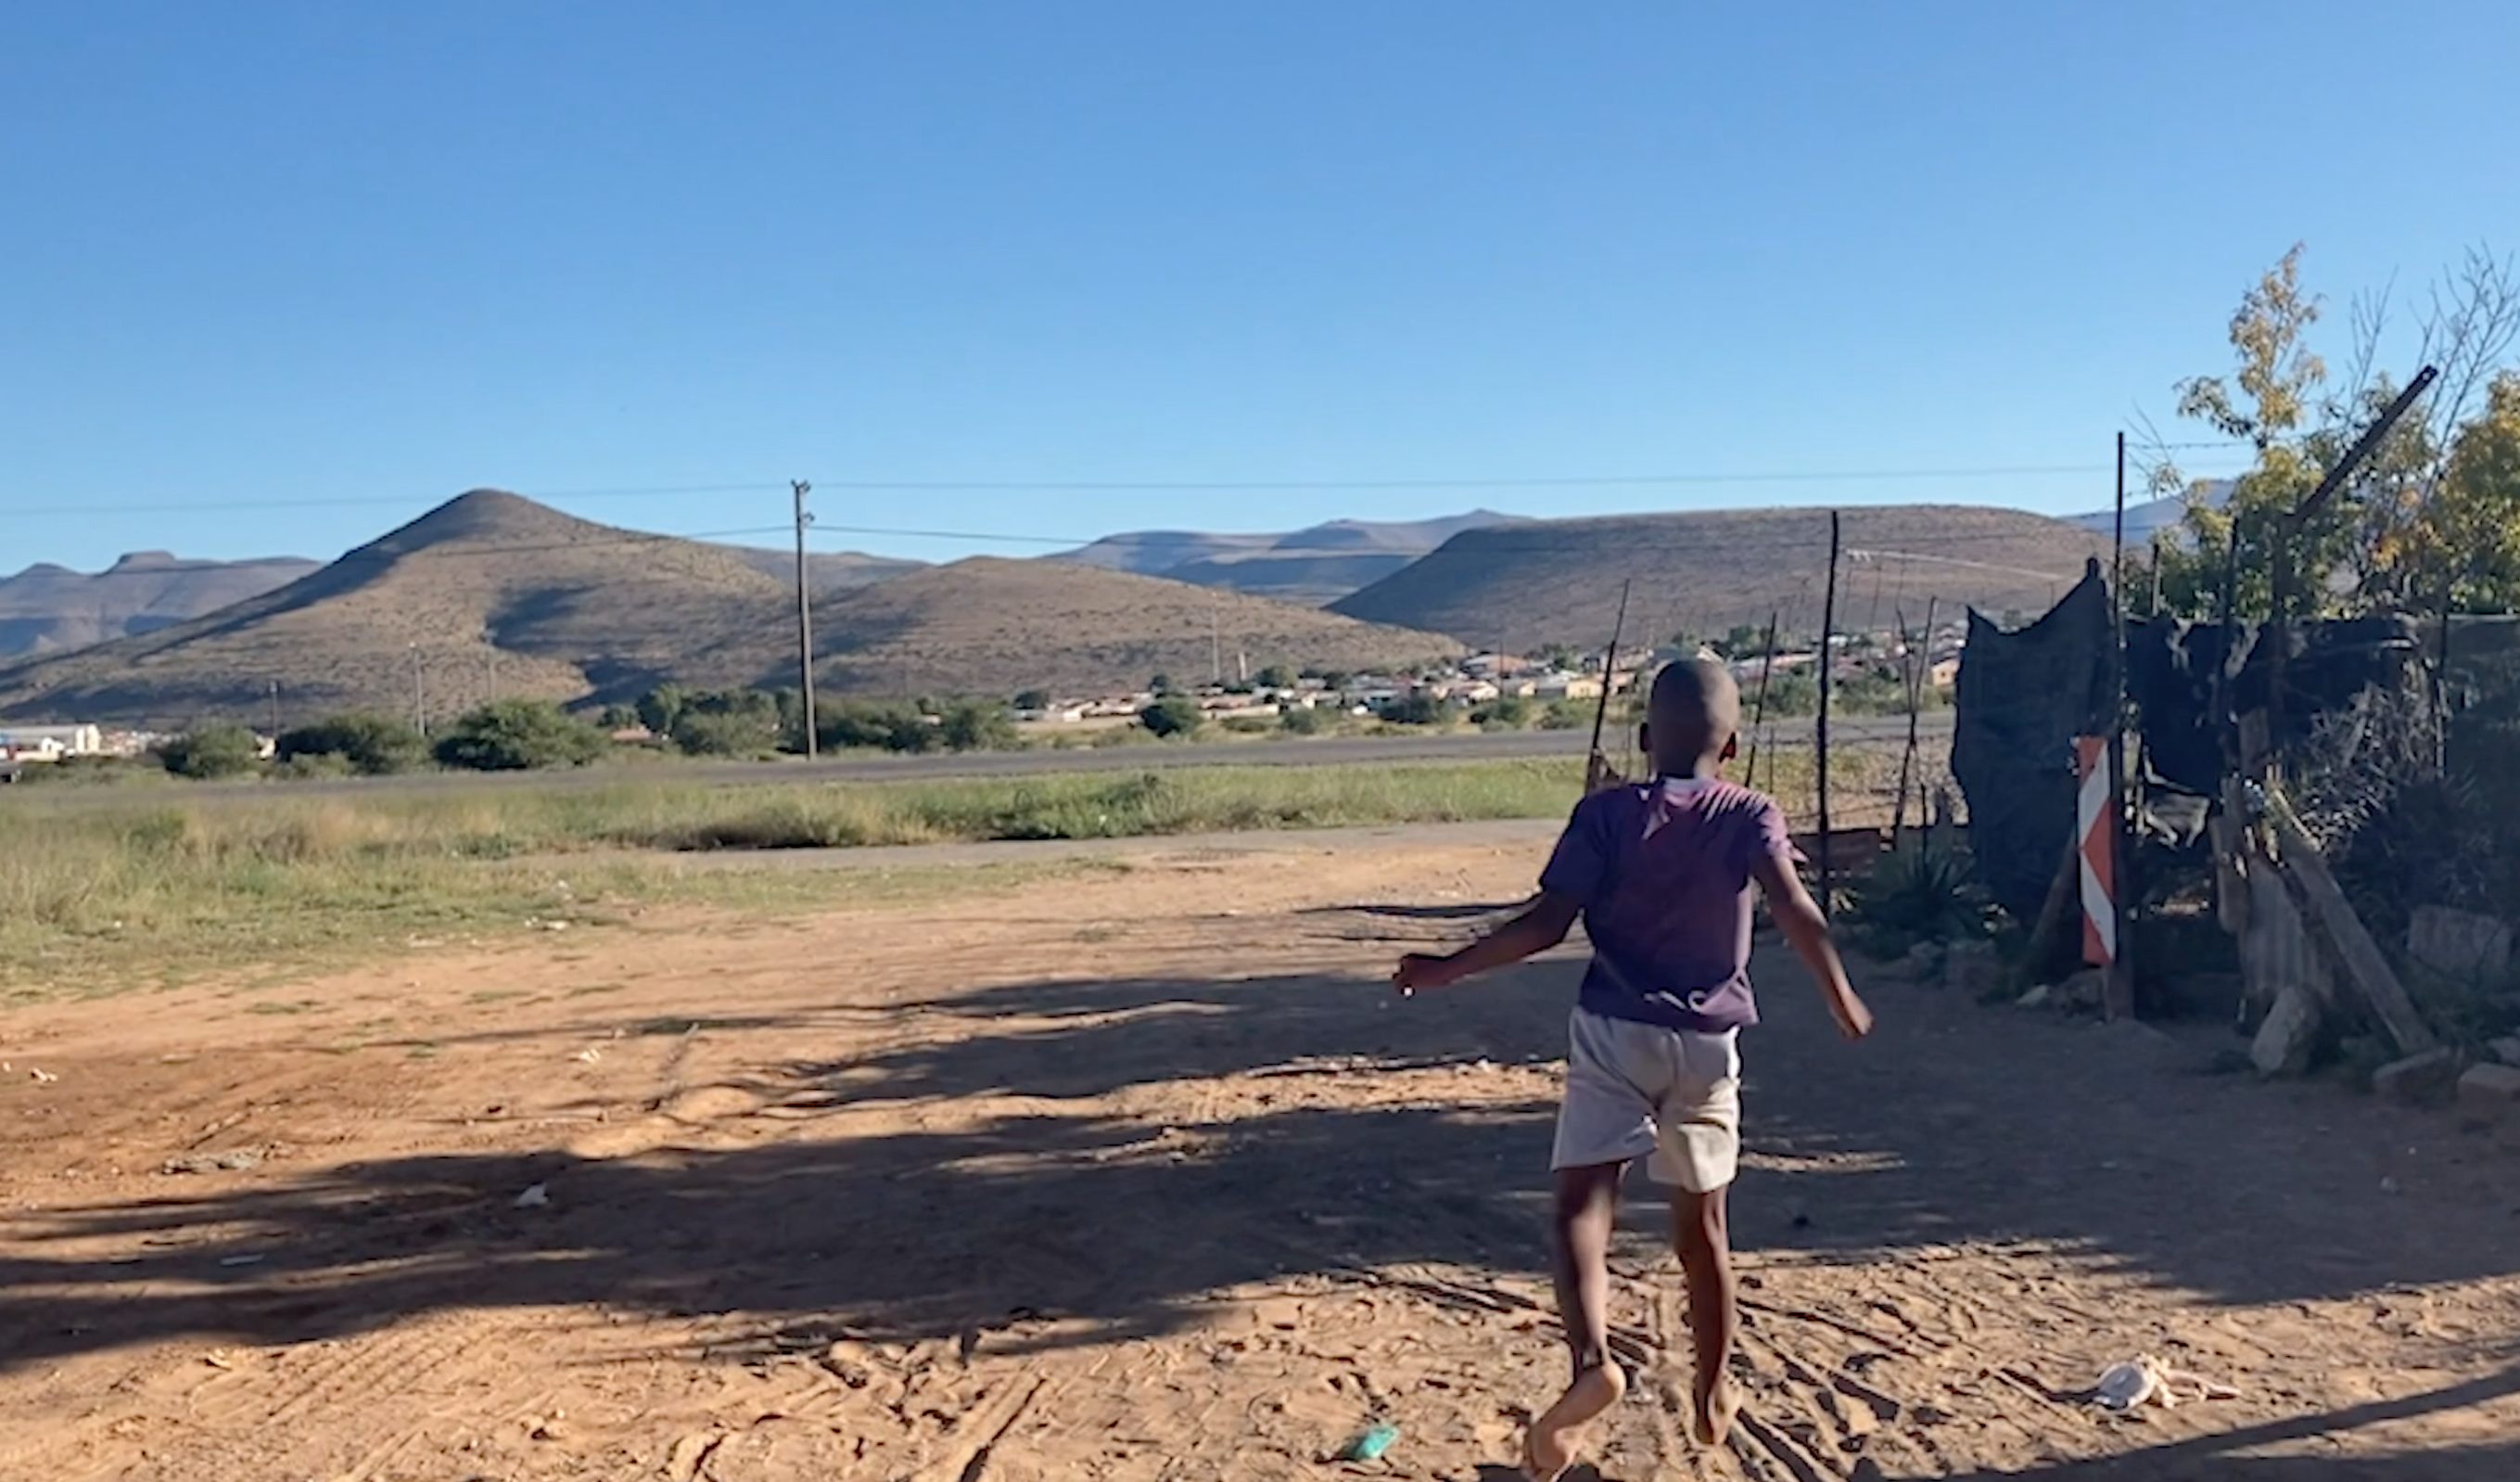 A barefoot boy runs on a sandy road. There are hills in the background.